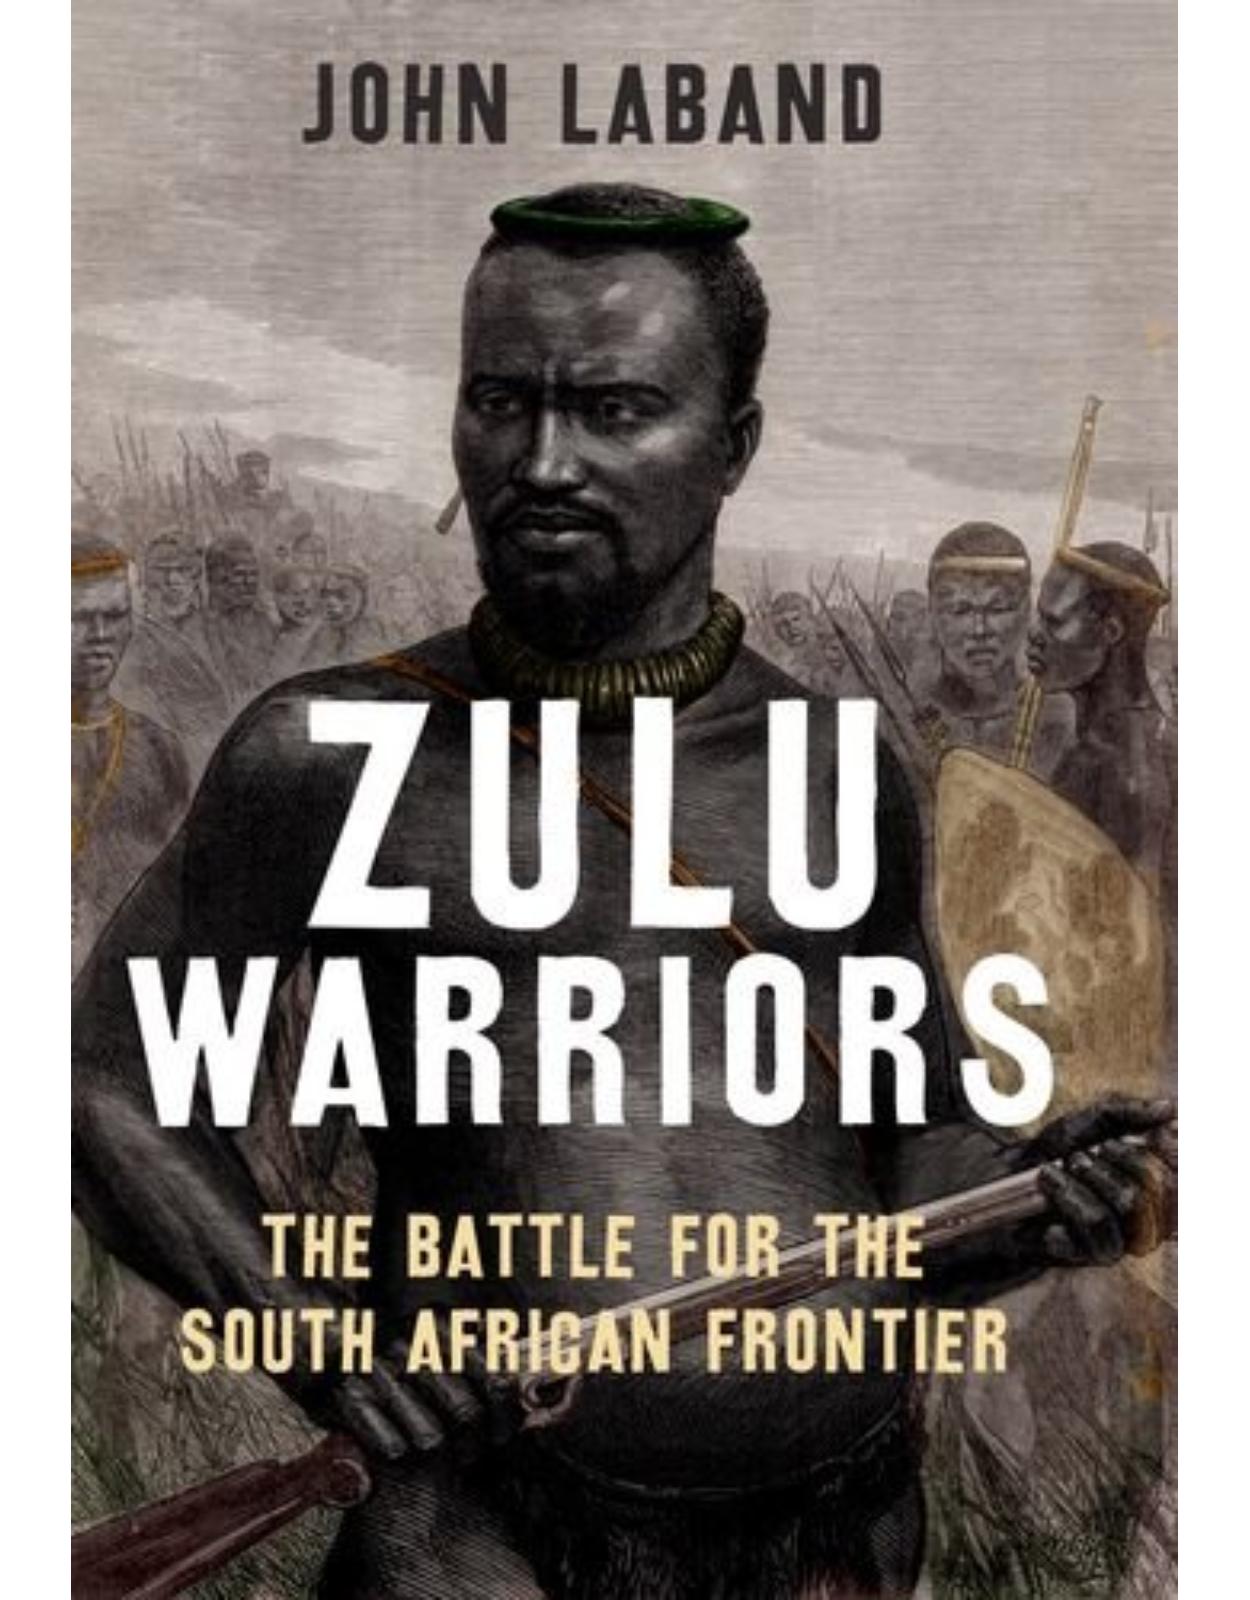 Zulu Warriors. The Battle for the South African Frontier